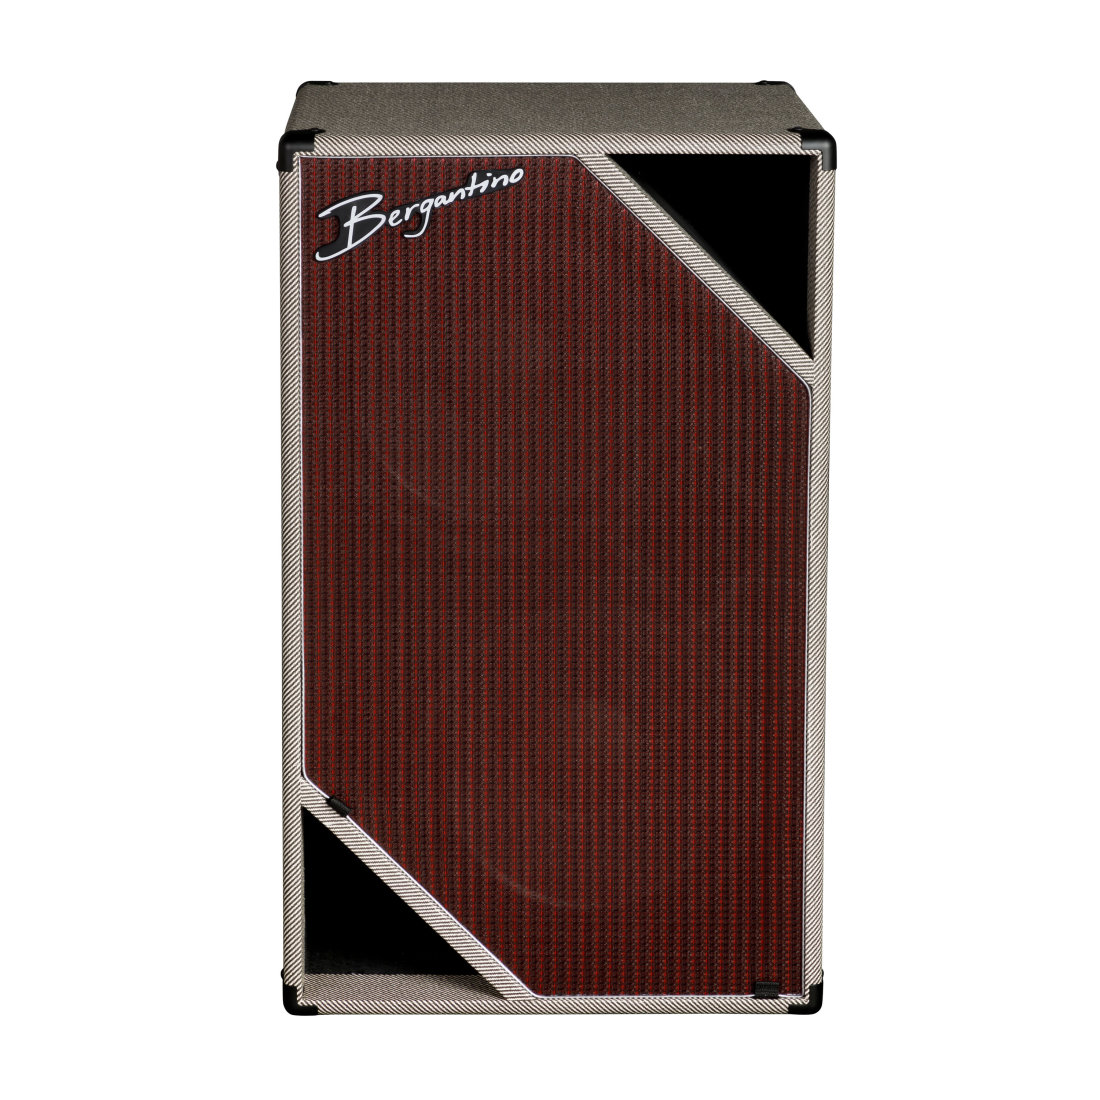 Special Edition NXTSE 2x12 Bass Loudspeaker